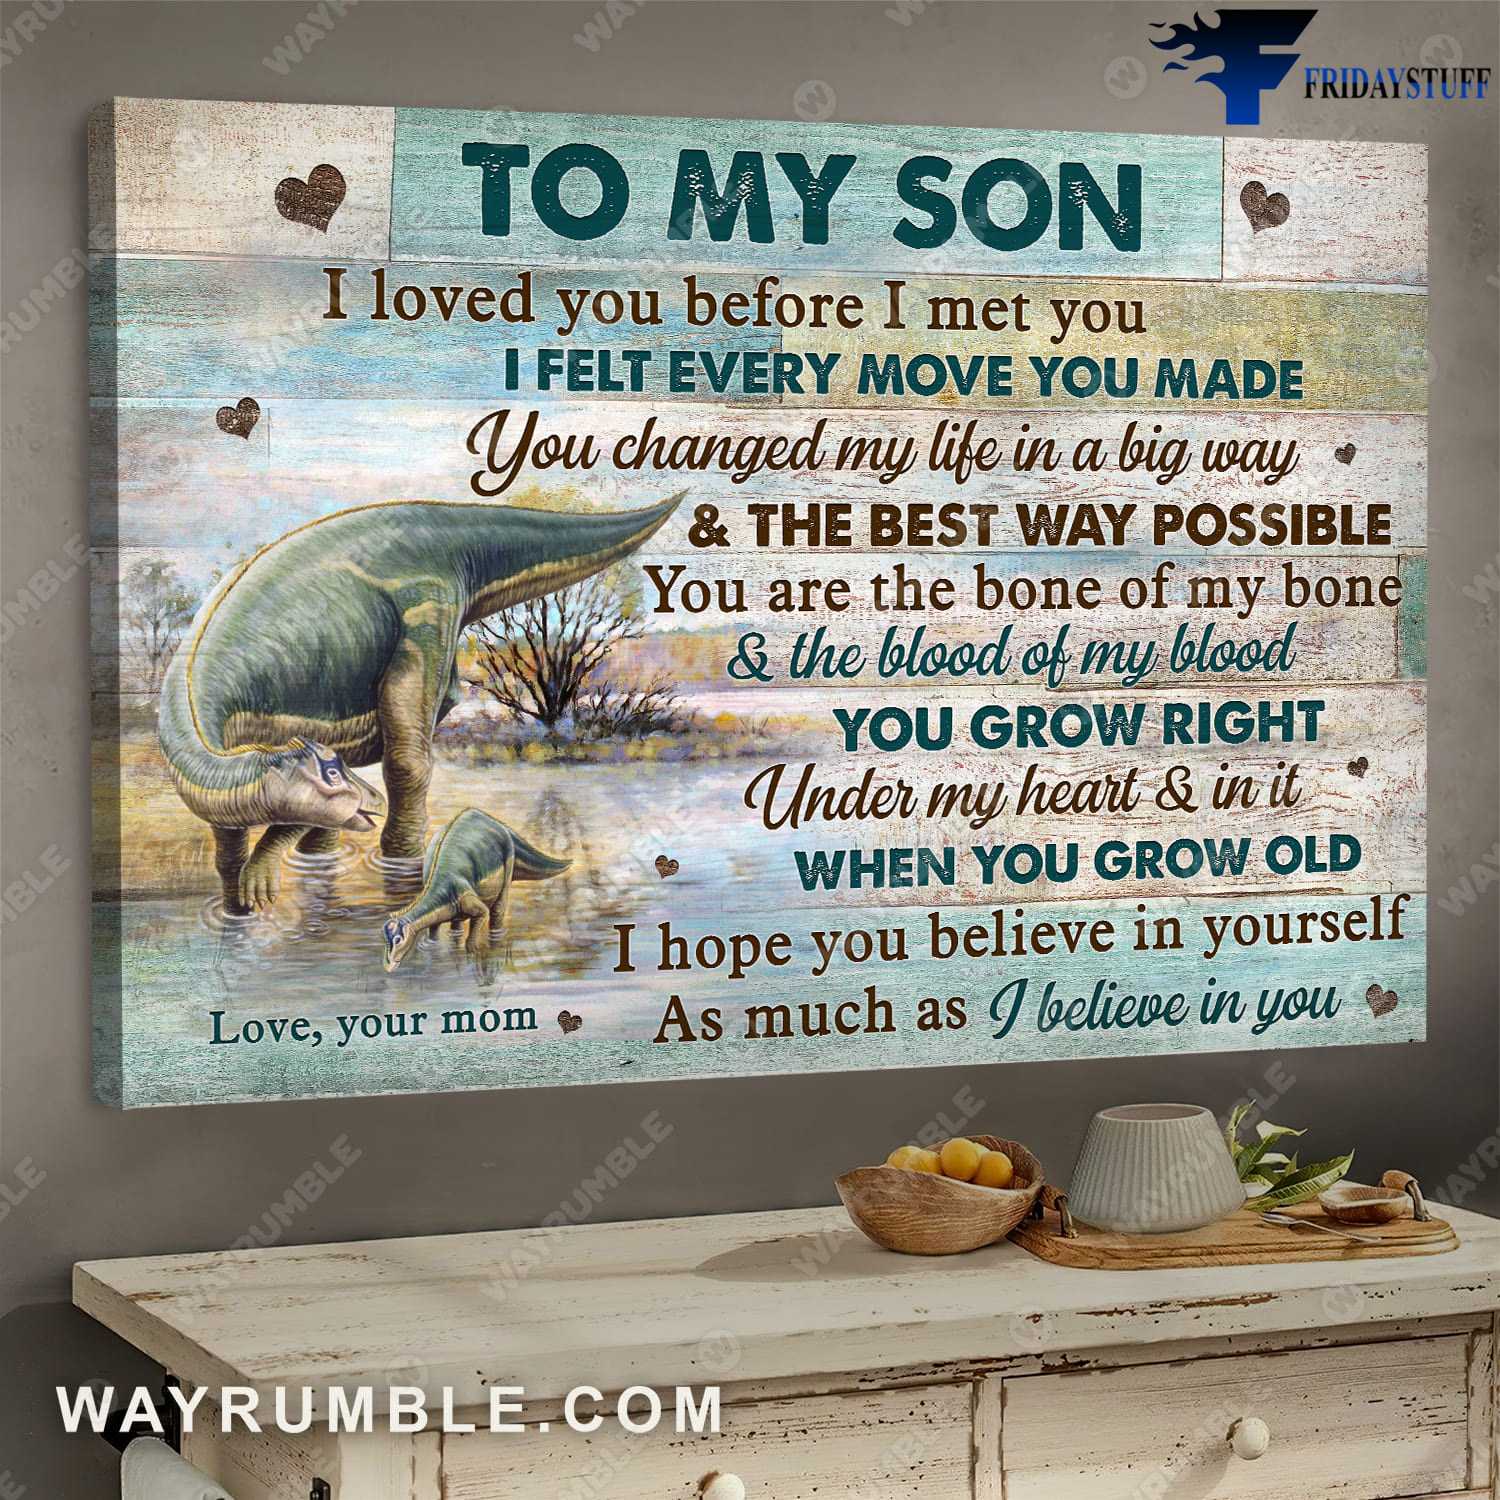 Mom And Son, Dinosaur Poster, To My Son, I Loved You Before I Met You, I Felt Every Move You Made, You Changed My Life, In A Big Way